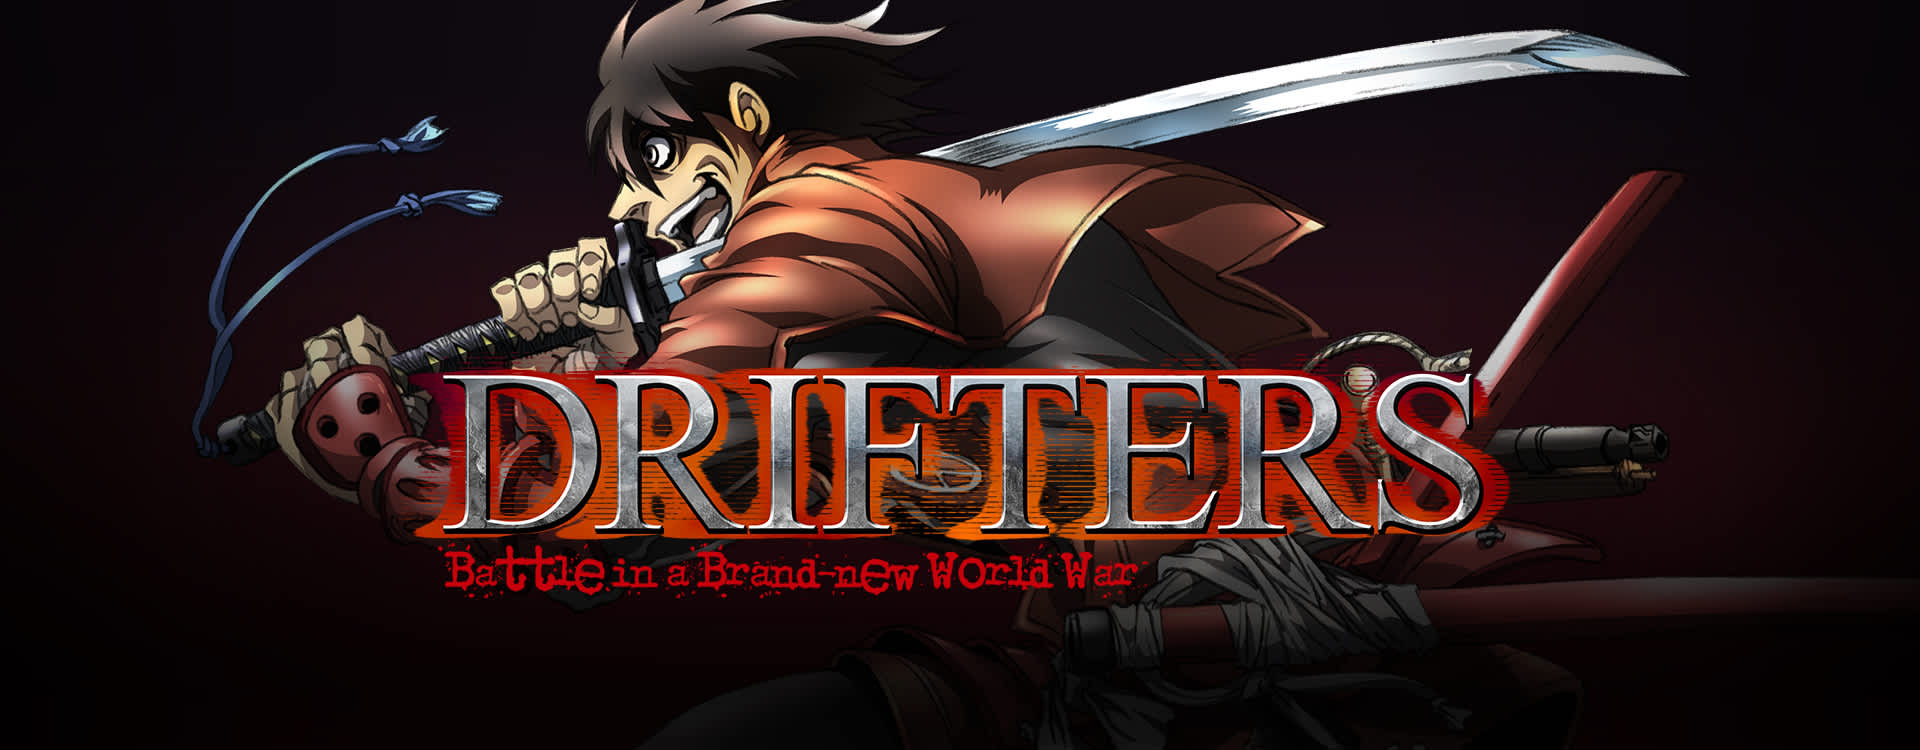 Watch Drifters Episodes Sub Dub Action Adventure Fantasy Anime